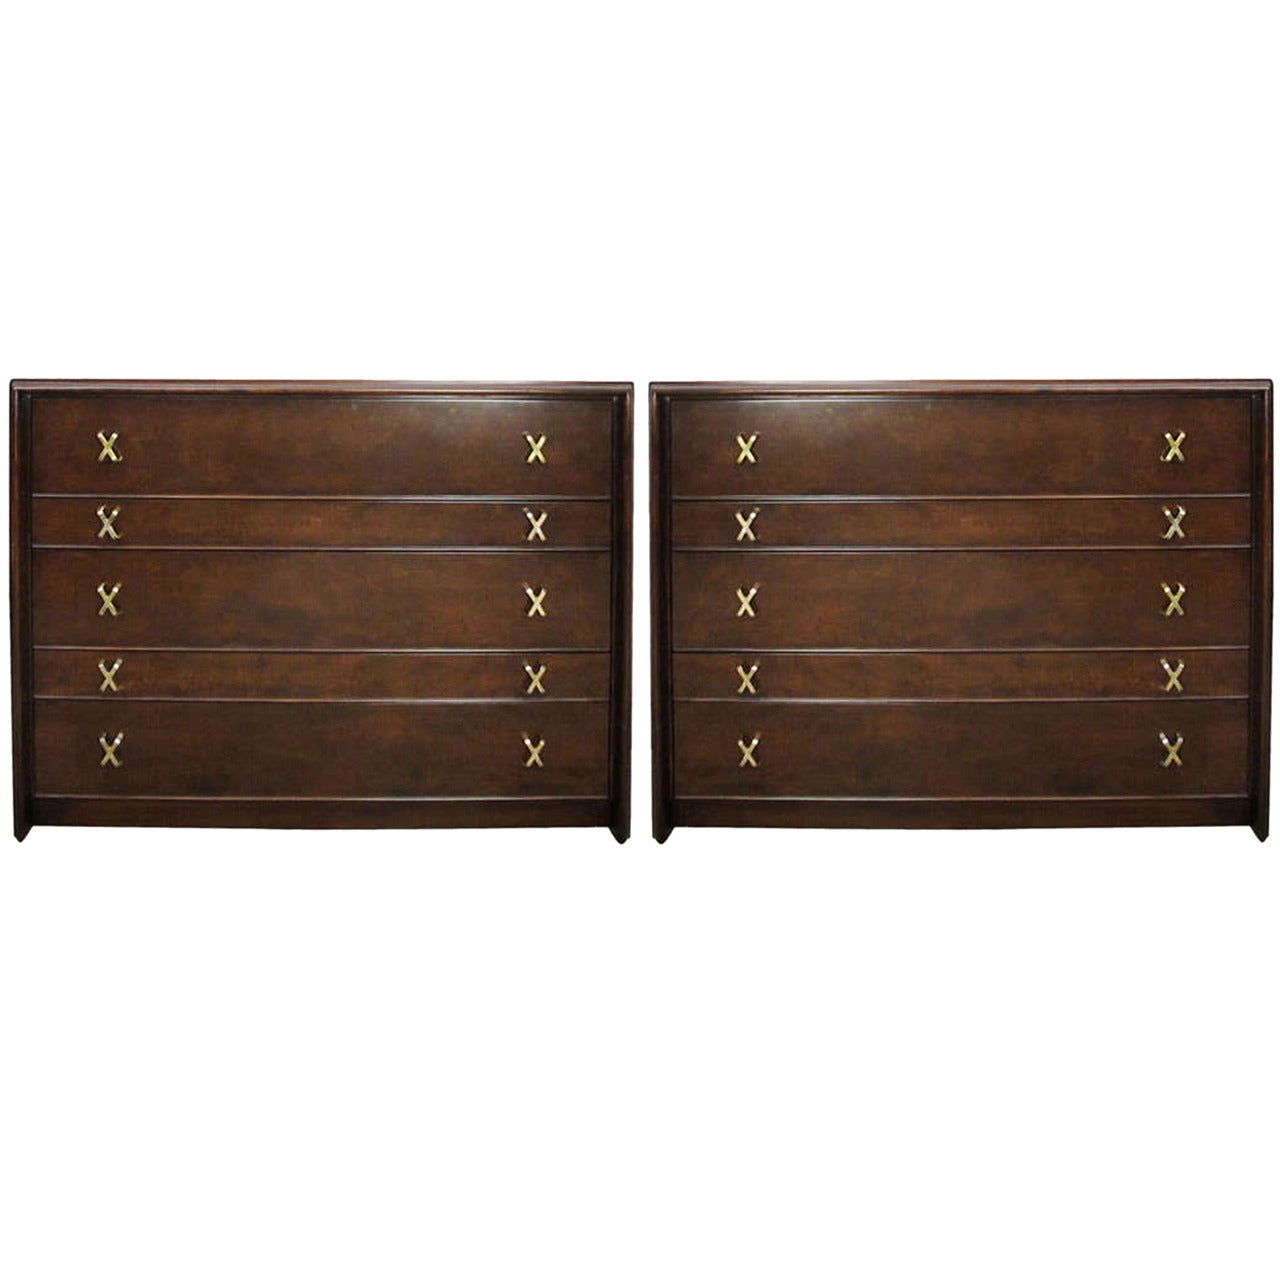 Pair of Glamorous Chests by Paul Frankl